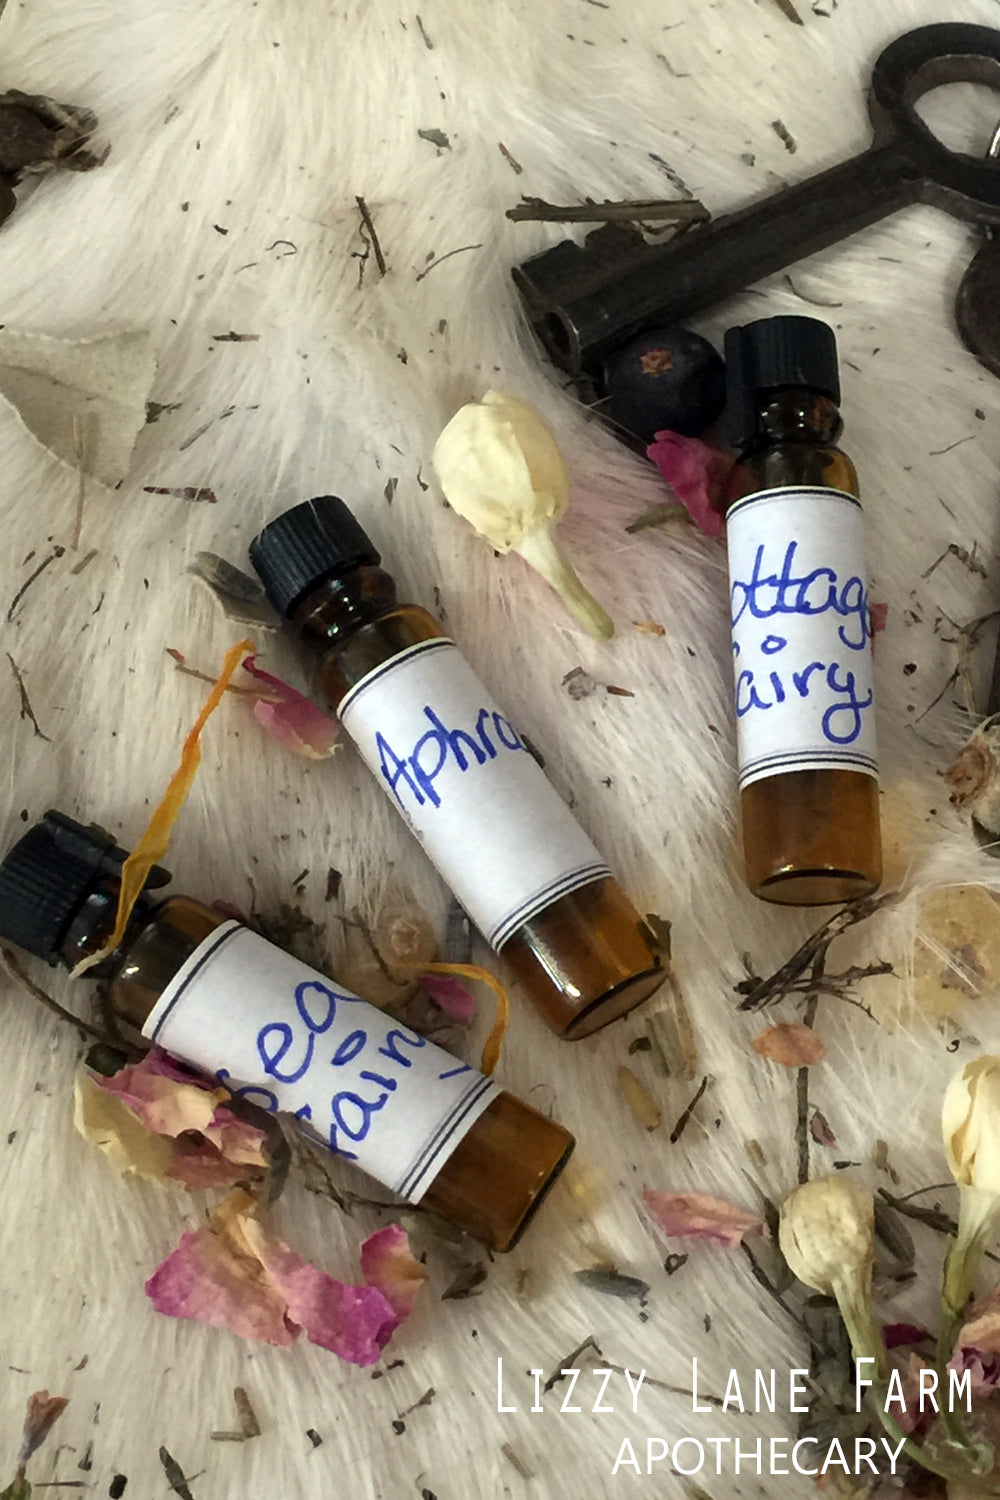 Refresh Me Intention Oil-refresh spirits, attract healthy energy and relationship | Roll on Bottle | Aromatherapy Oil | Herbal Sachet | - Lizzy Lane Farm Apothecary